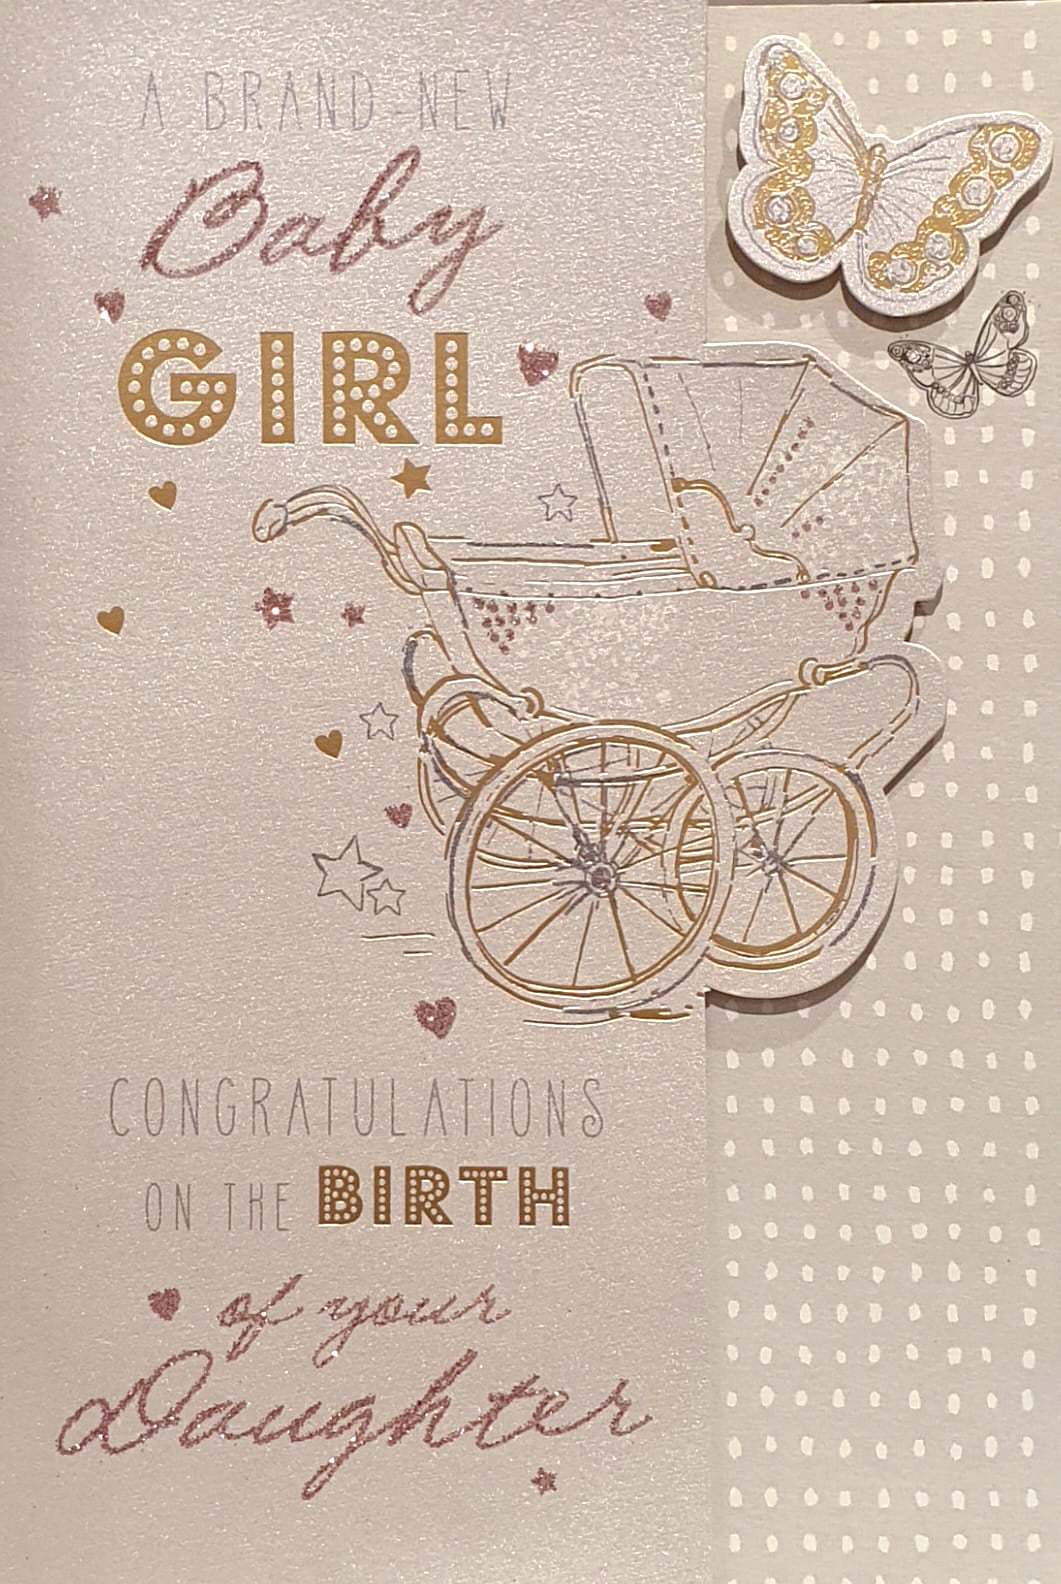 Large New Baby Girl Card - New Beginnings